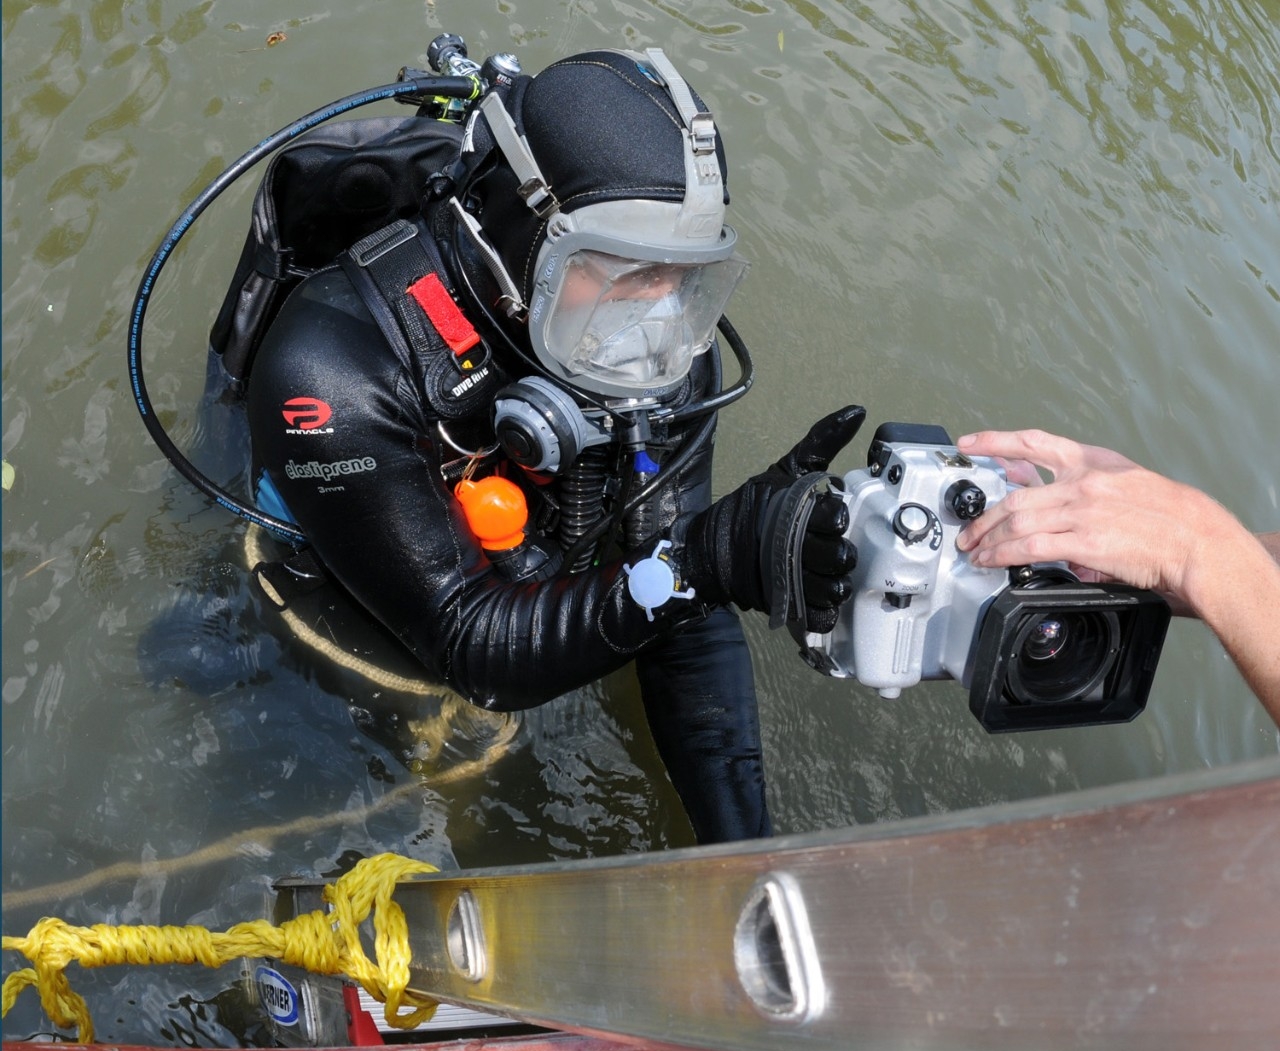 Underwater archaeologist Dr. Alexis Catsambis prepares to dive as fellow archaeologist Dr. George Schwarz hands him an underwater video camera.